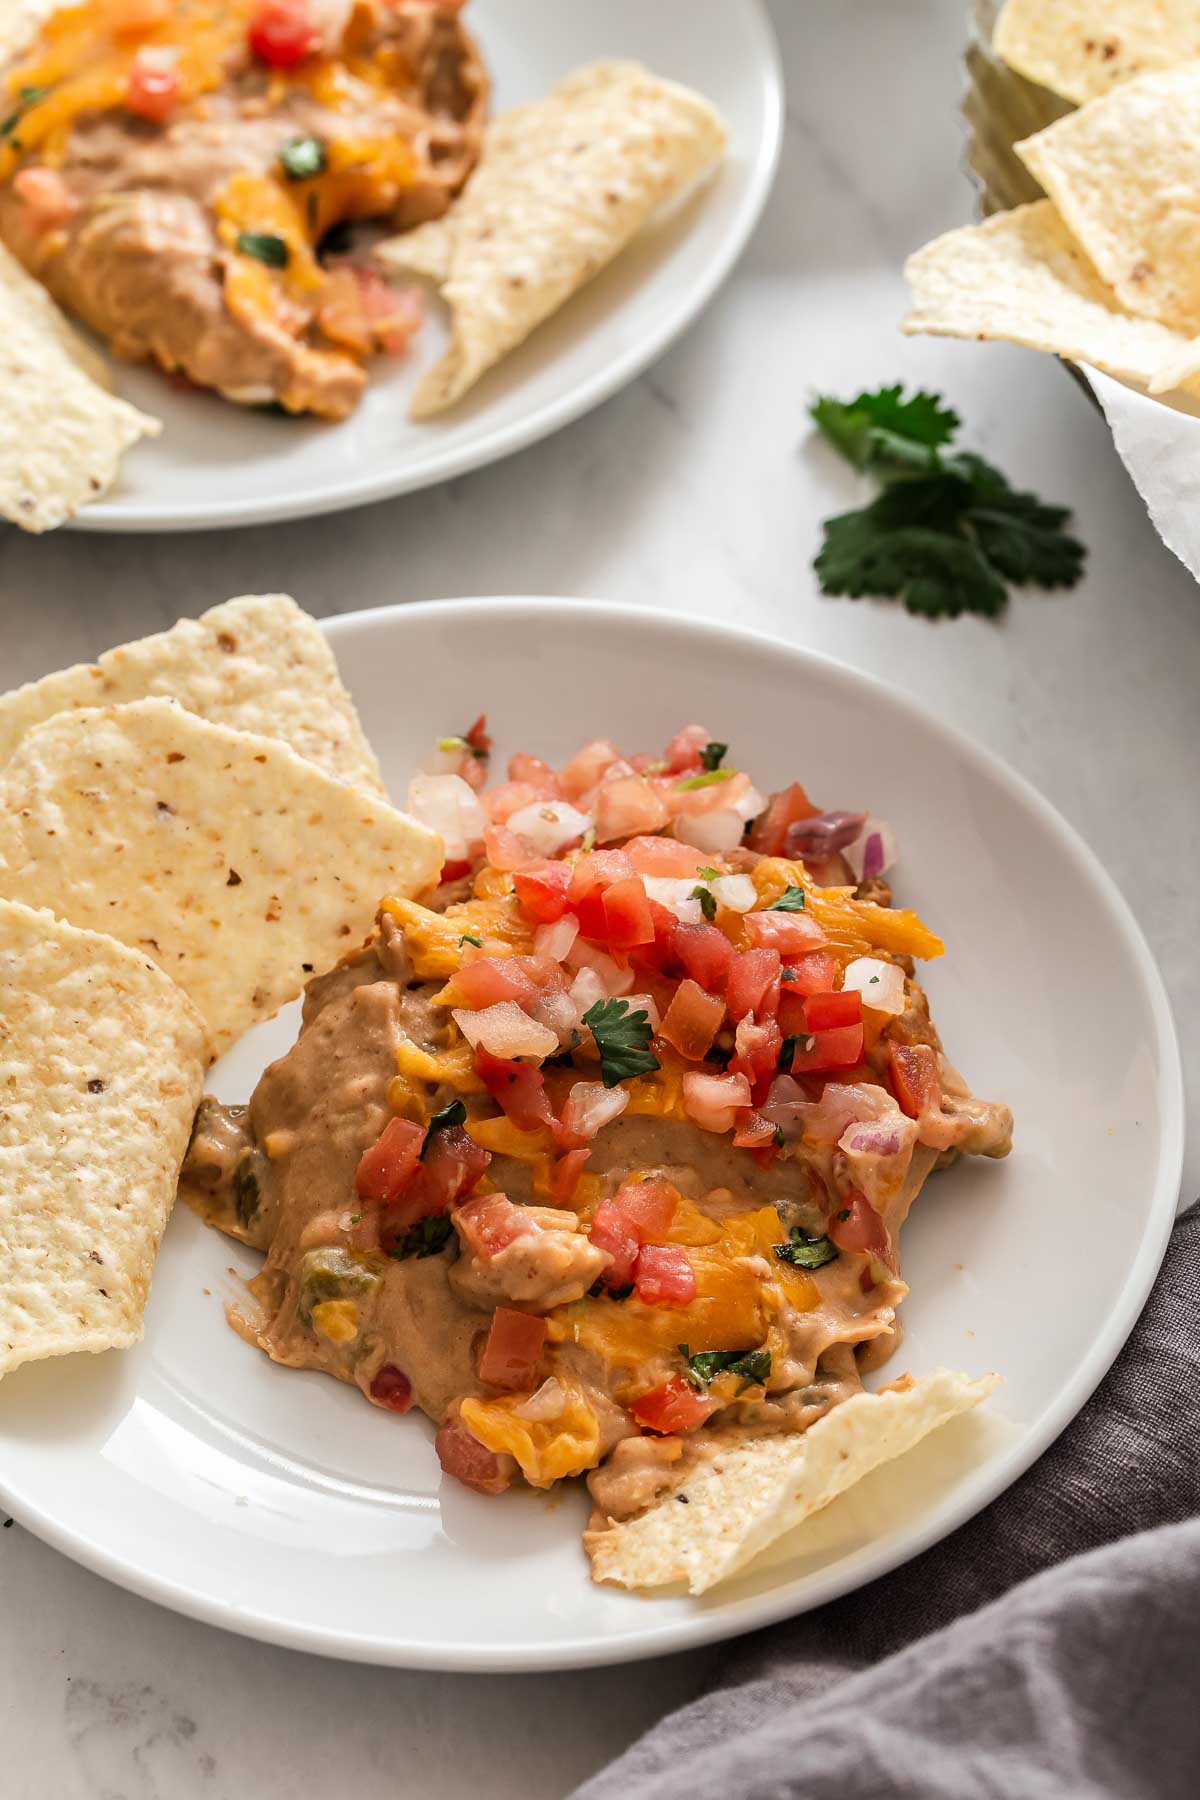 Bean dip on plate with tortilla chips.